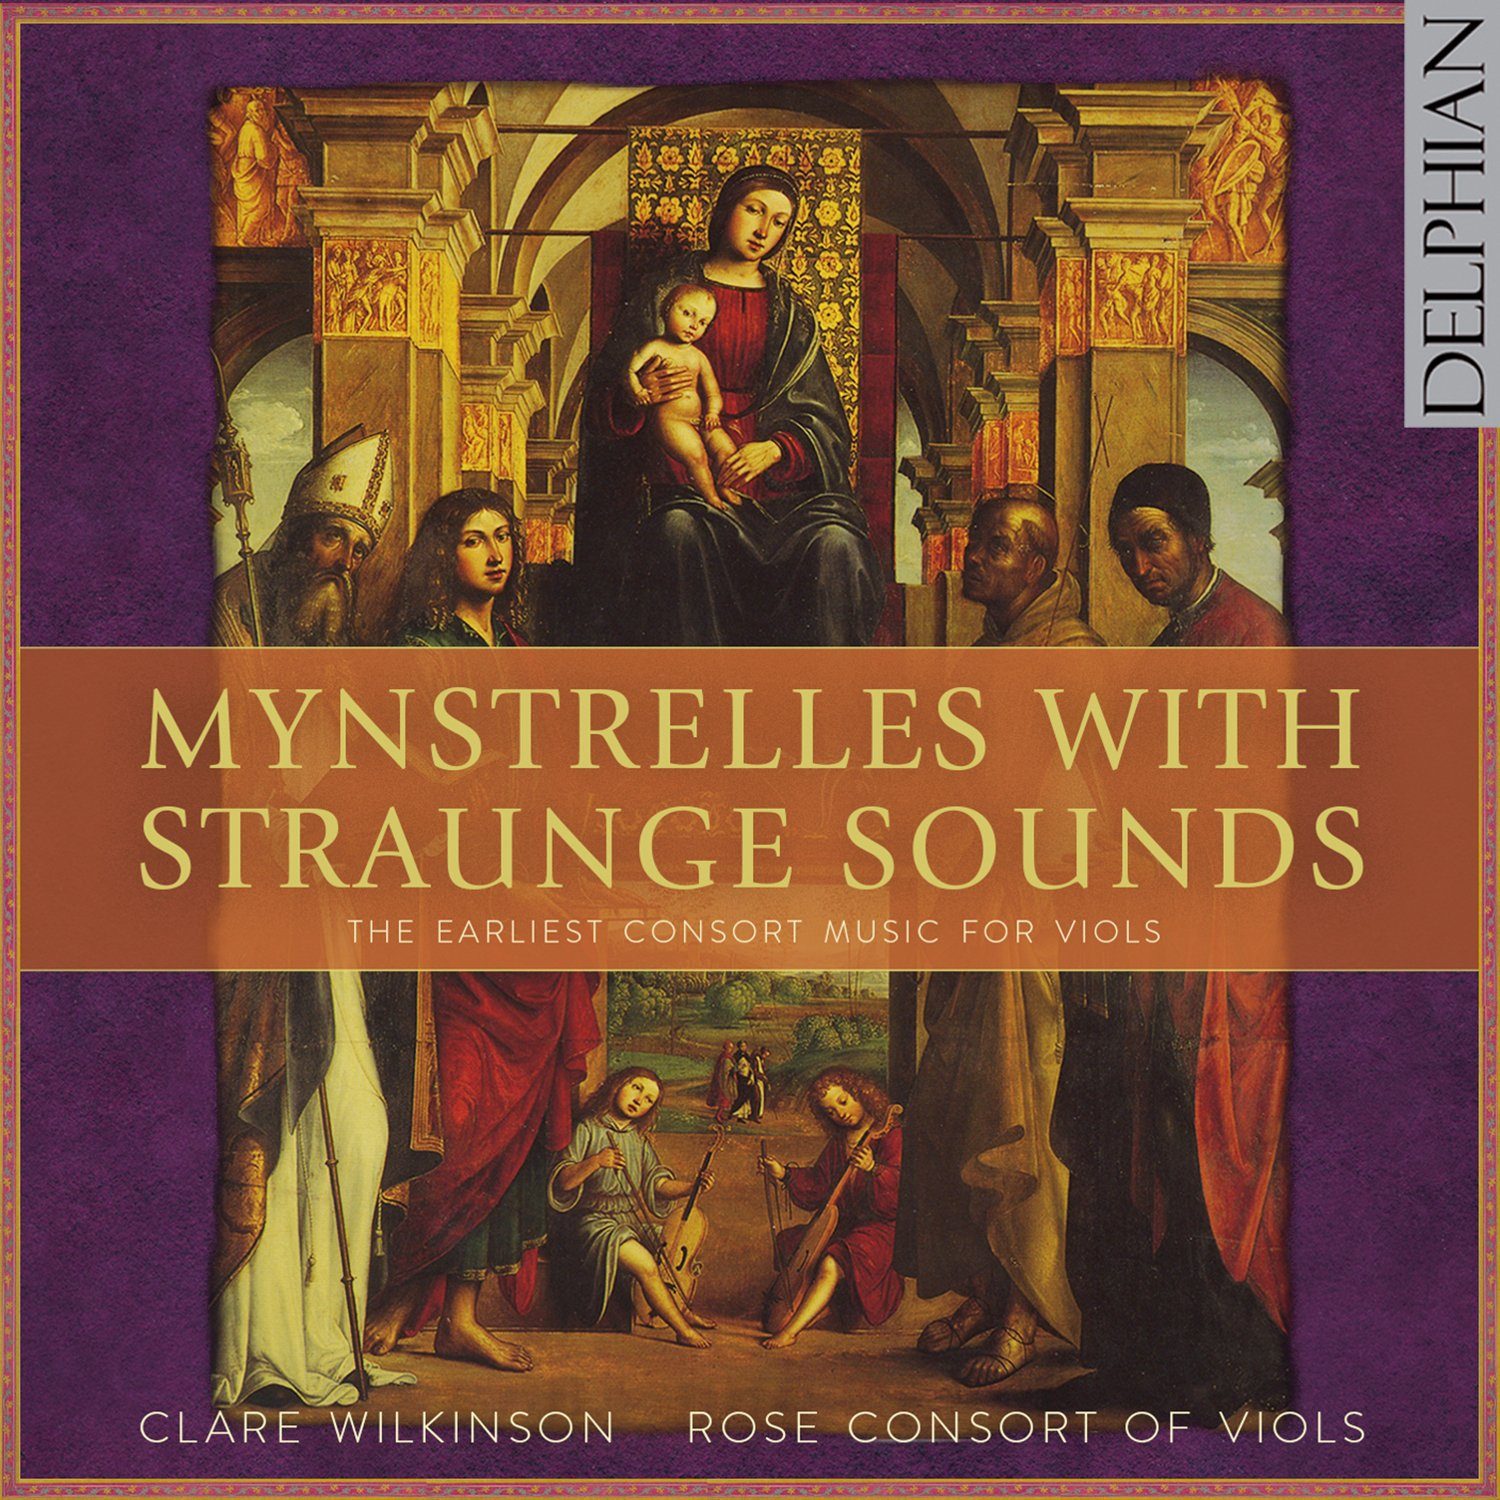 Mynstrelles with Straunge Sounds: the earliest consort music for viols CD Delphian Records